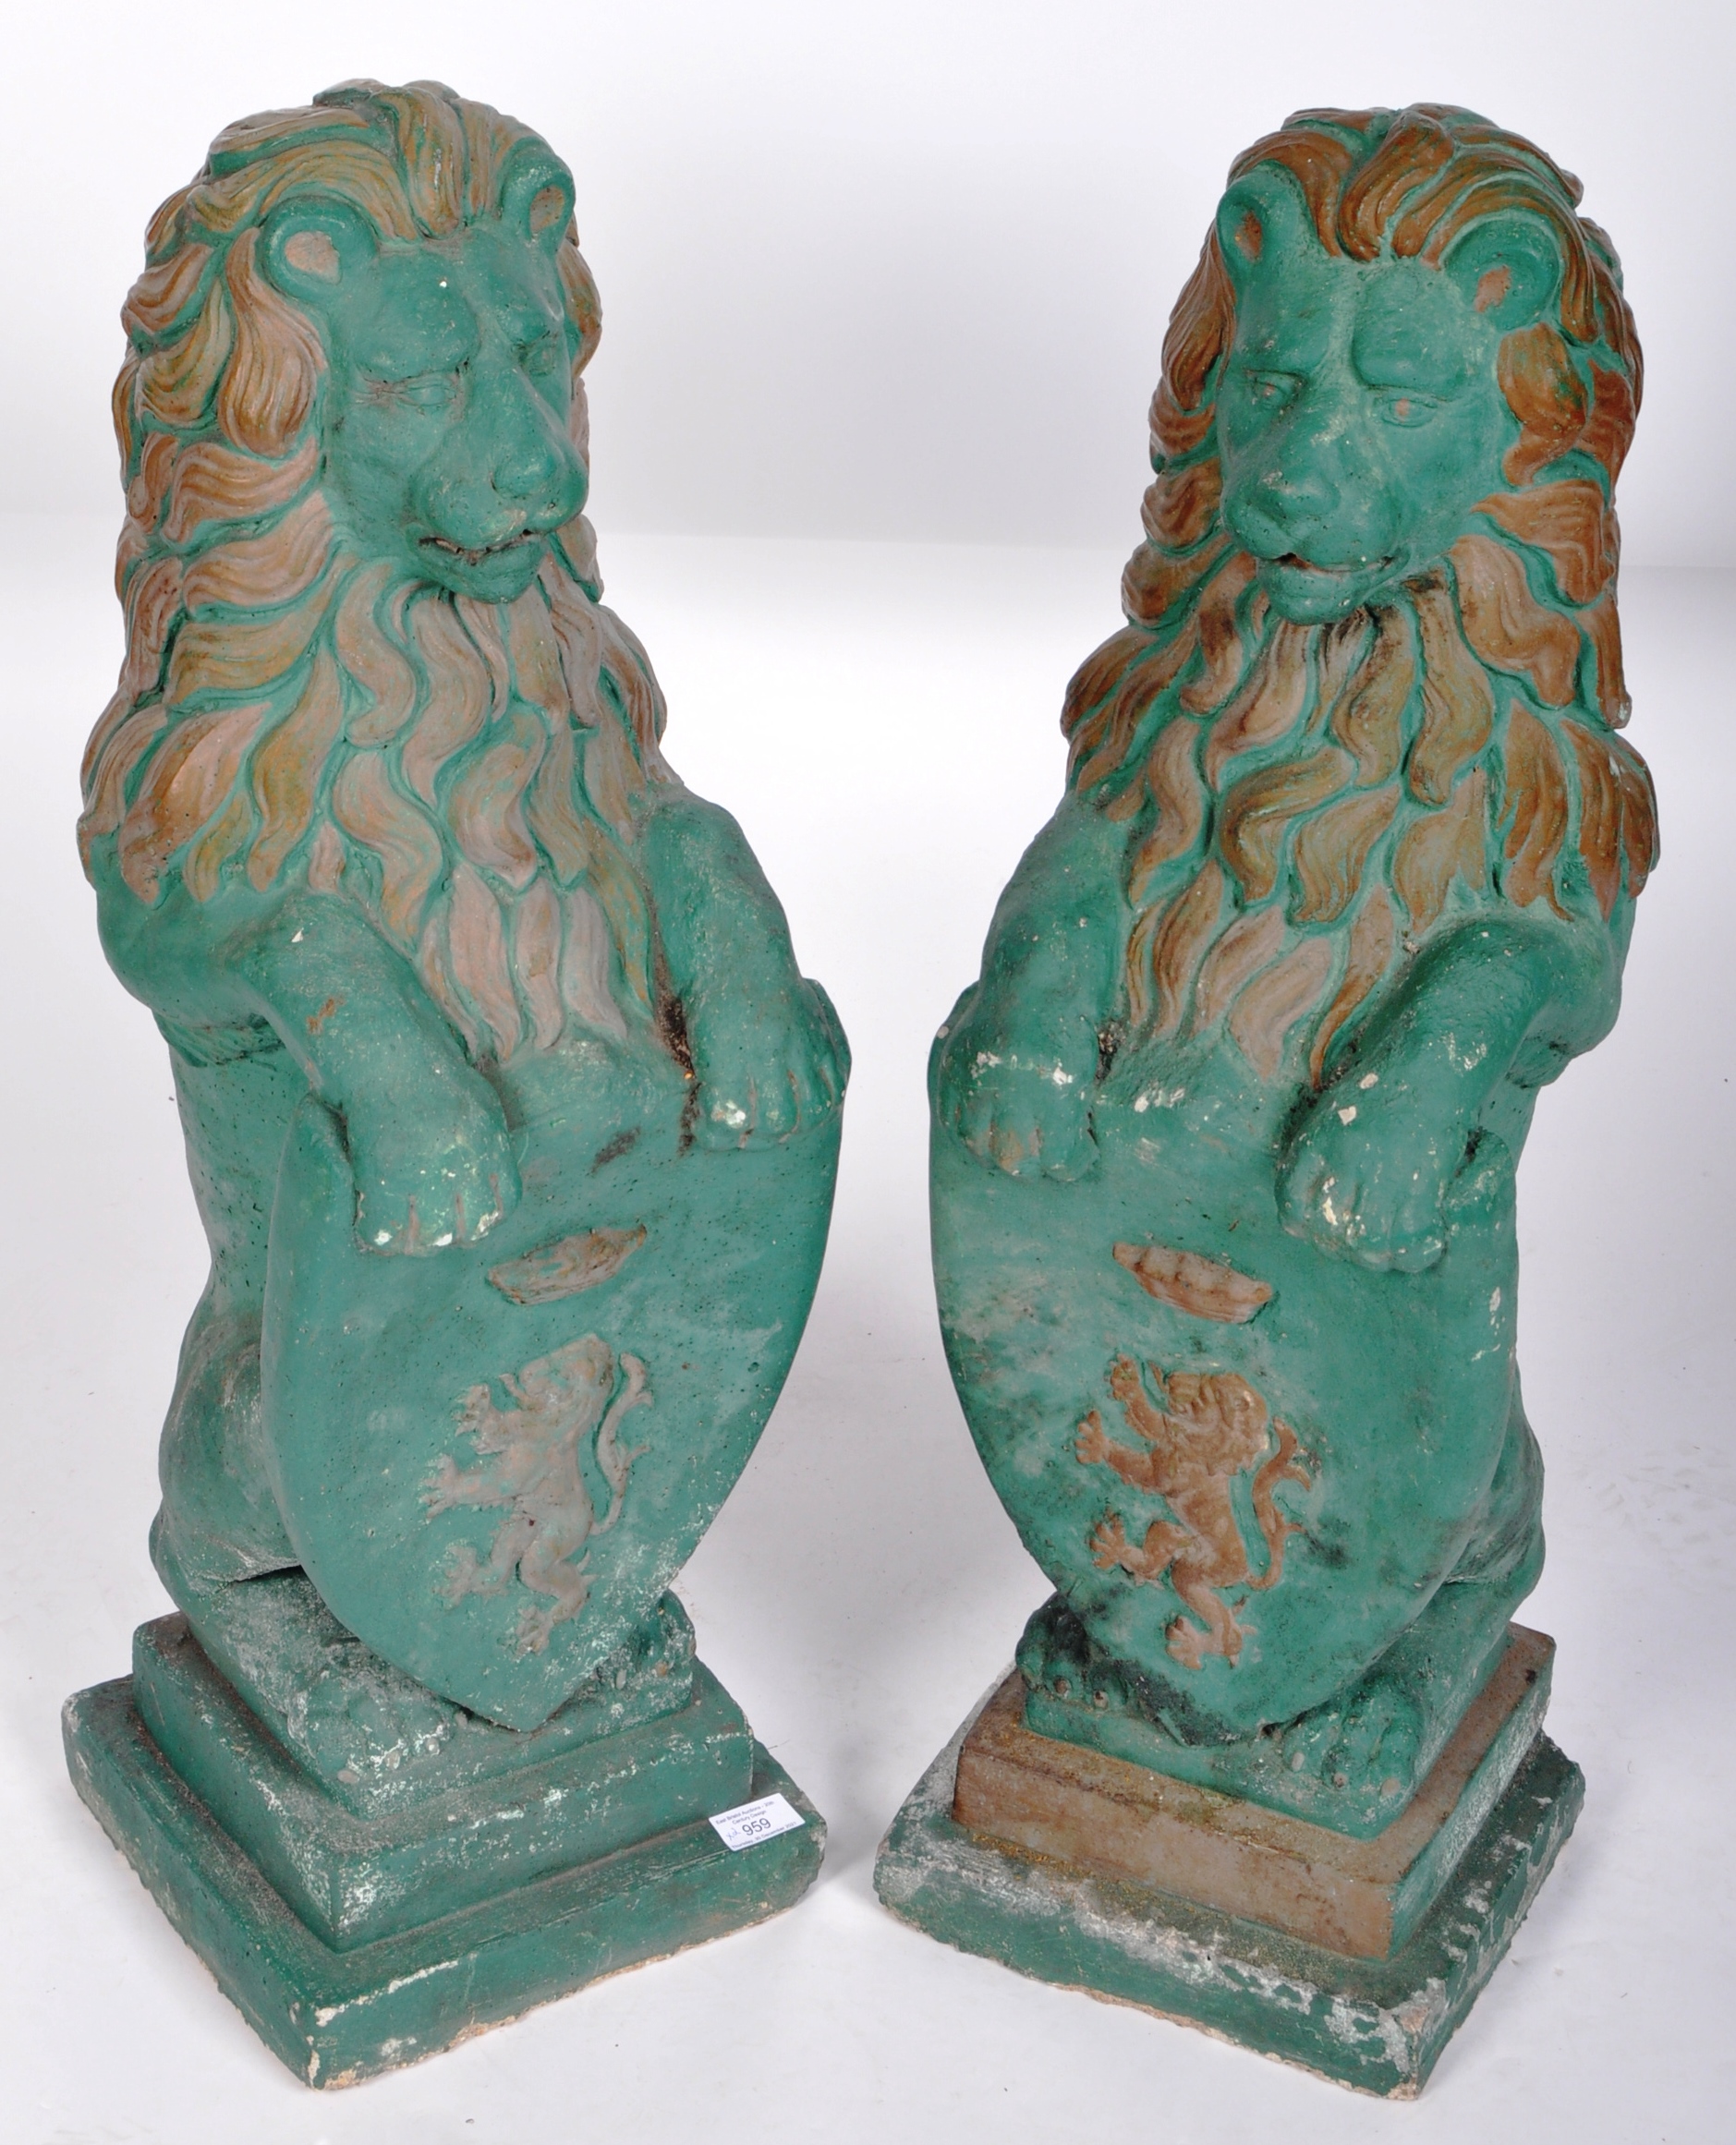 MATCHING PAIR OF PAINTED RECONSTITUTED STONE LION FIGURES - Image 2 of 12